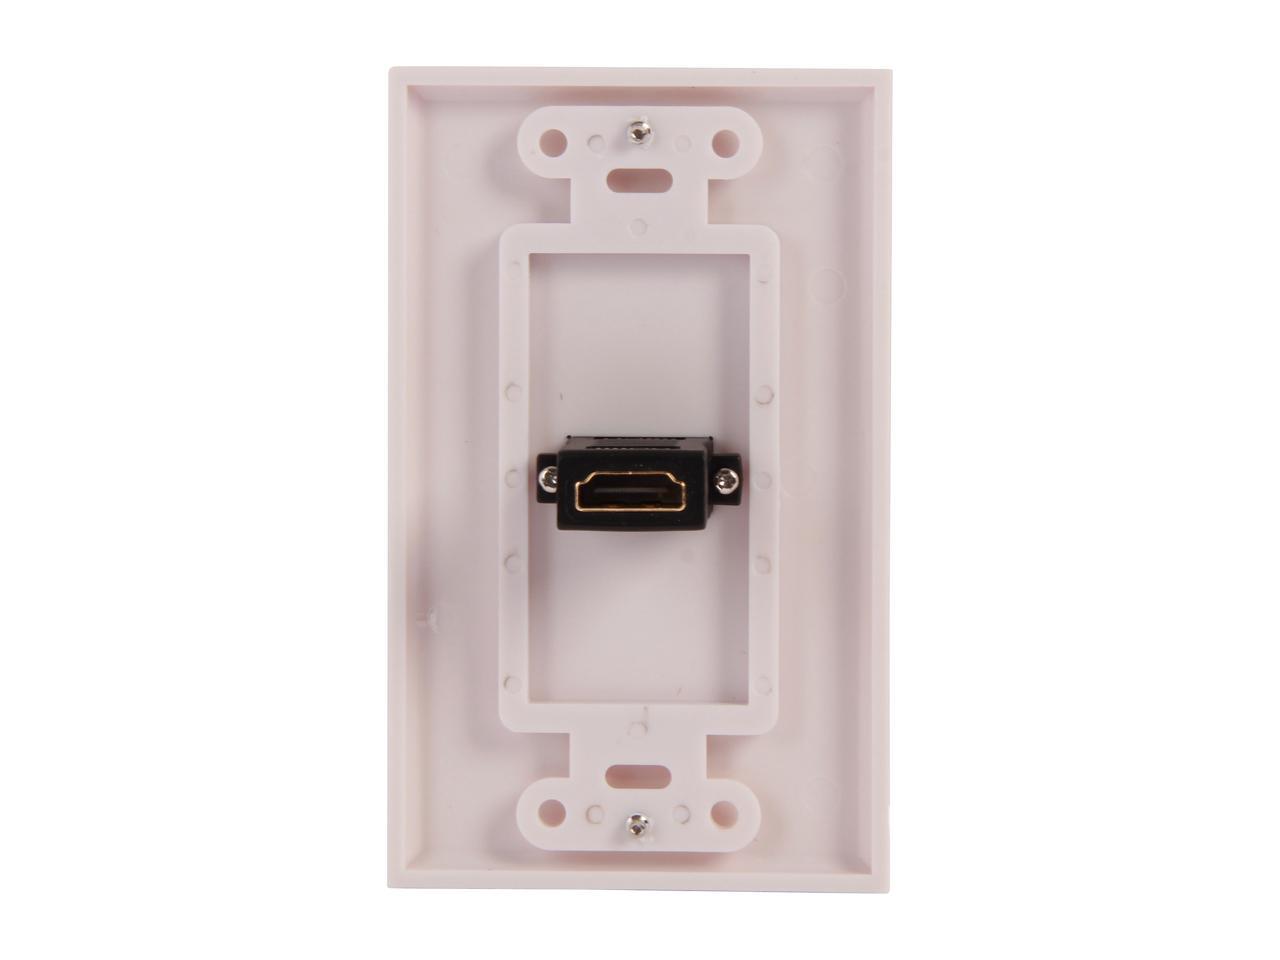 StarTech.com HDMIPLATE Single Outlet Female HDMI® Wall Plate -White